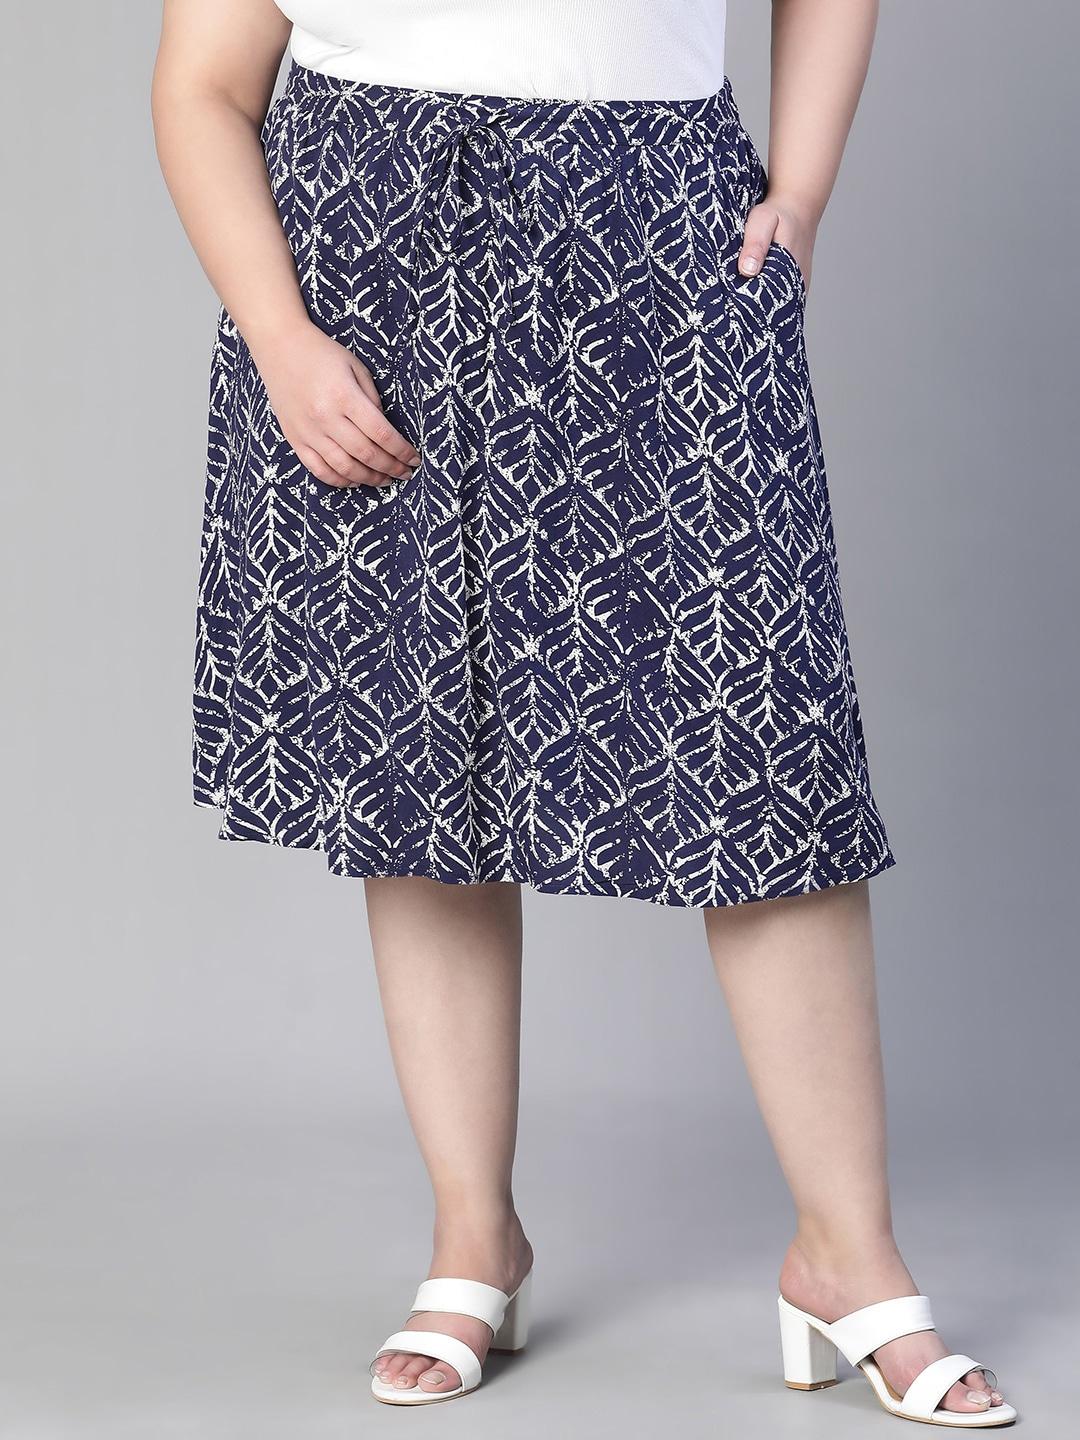 oxolloxo-plus-size-floral-printed-flared-midi-skirt